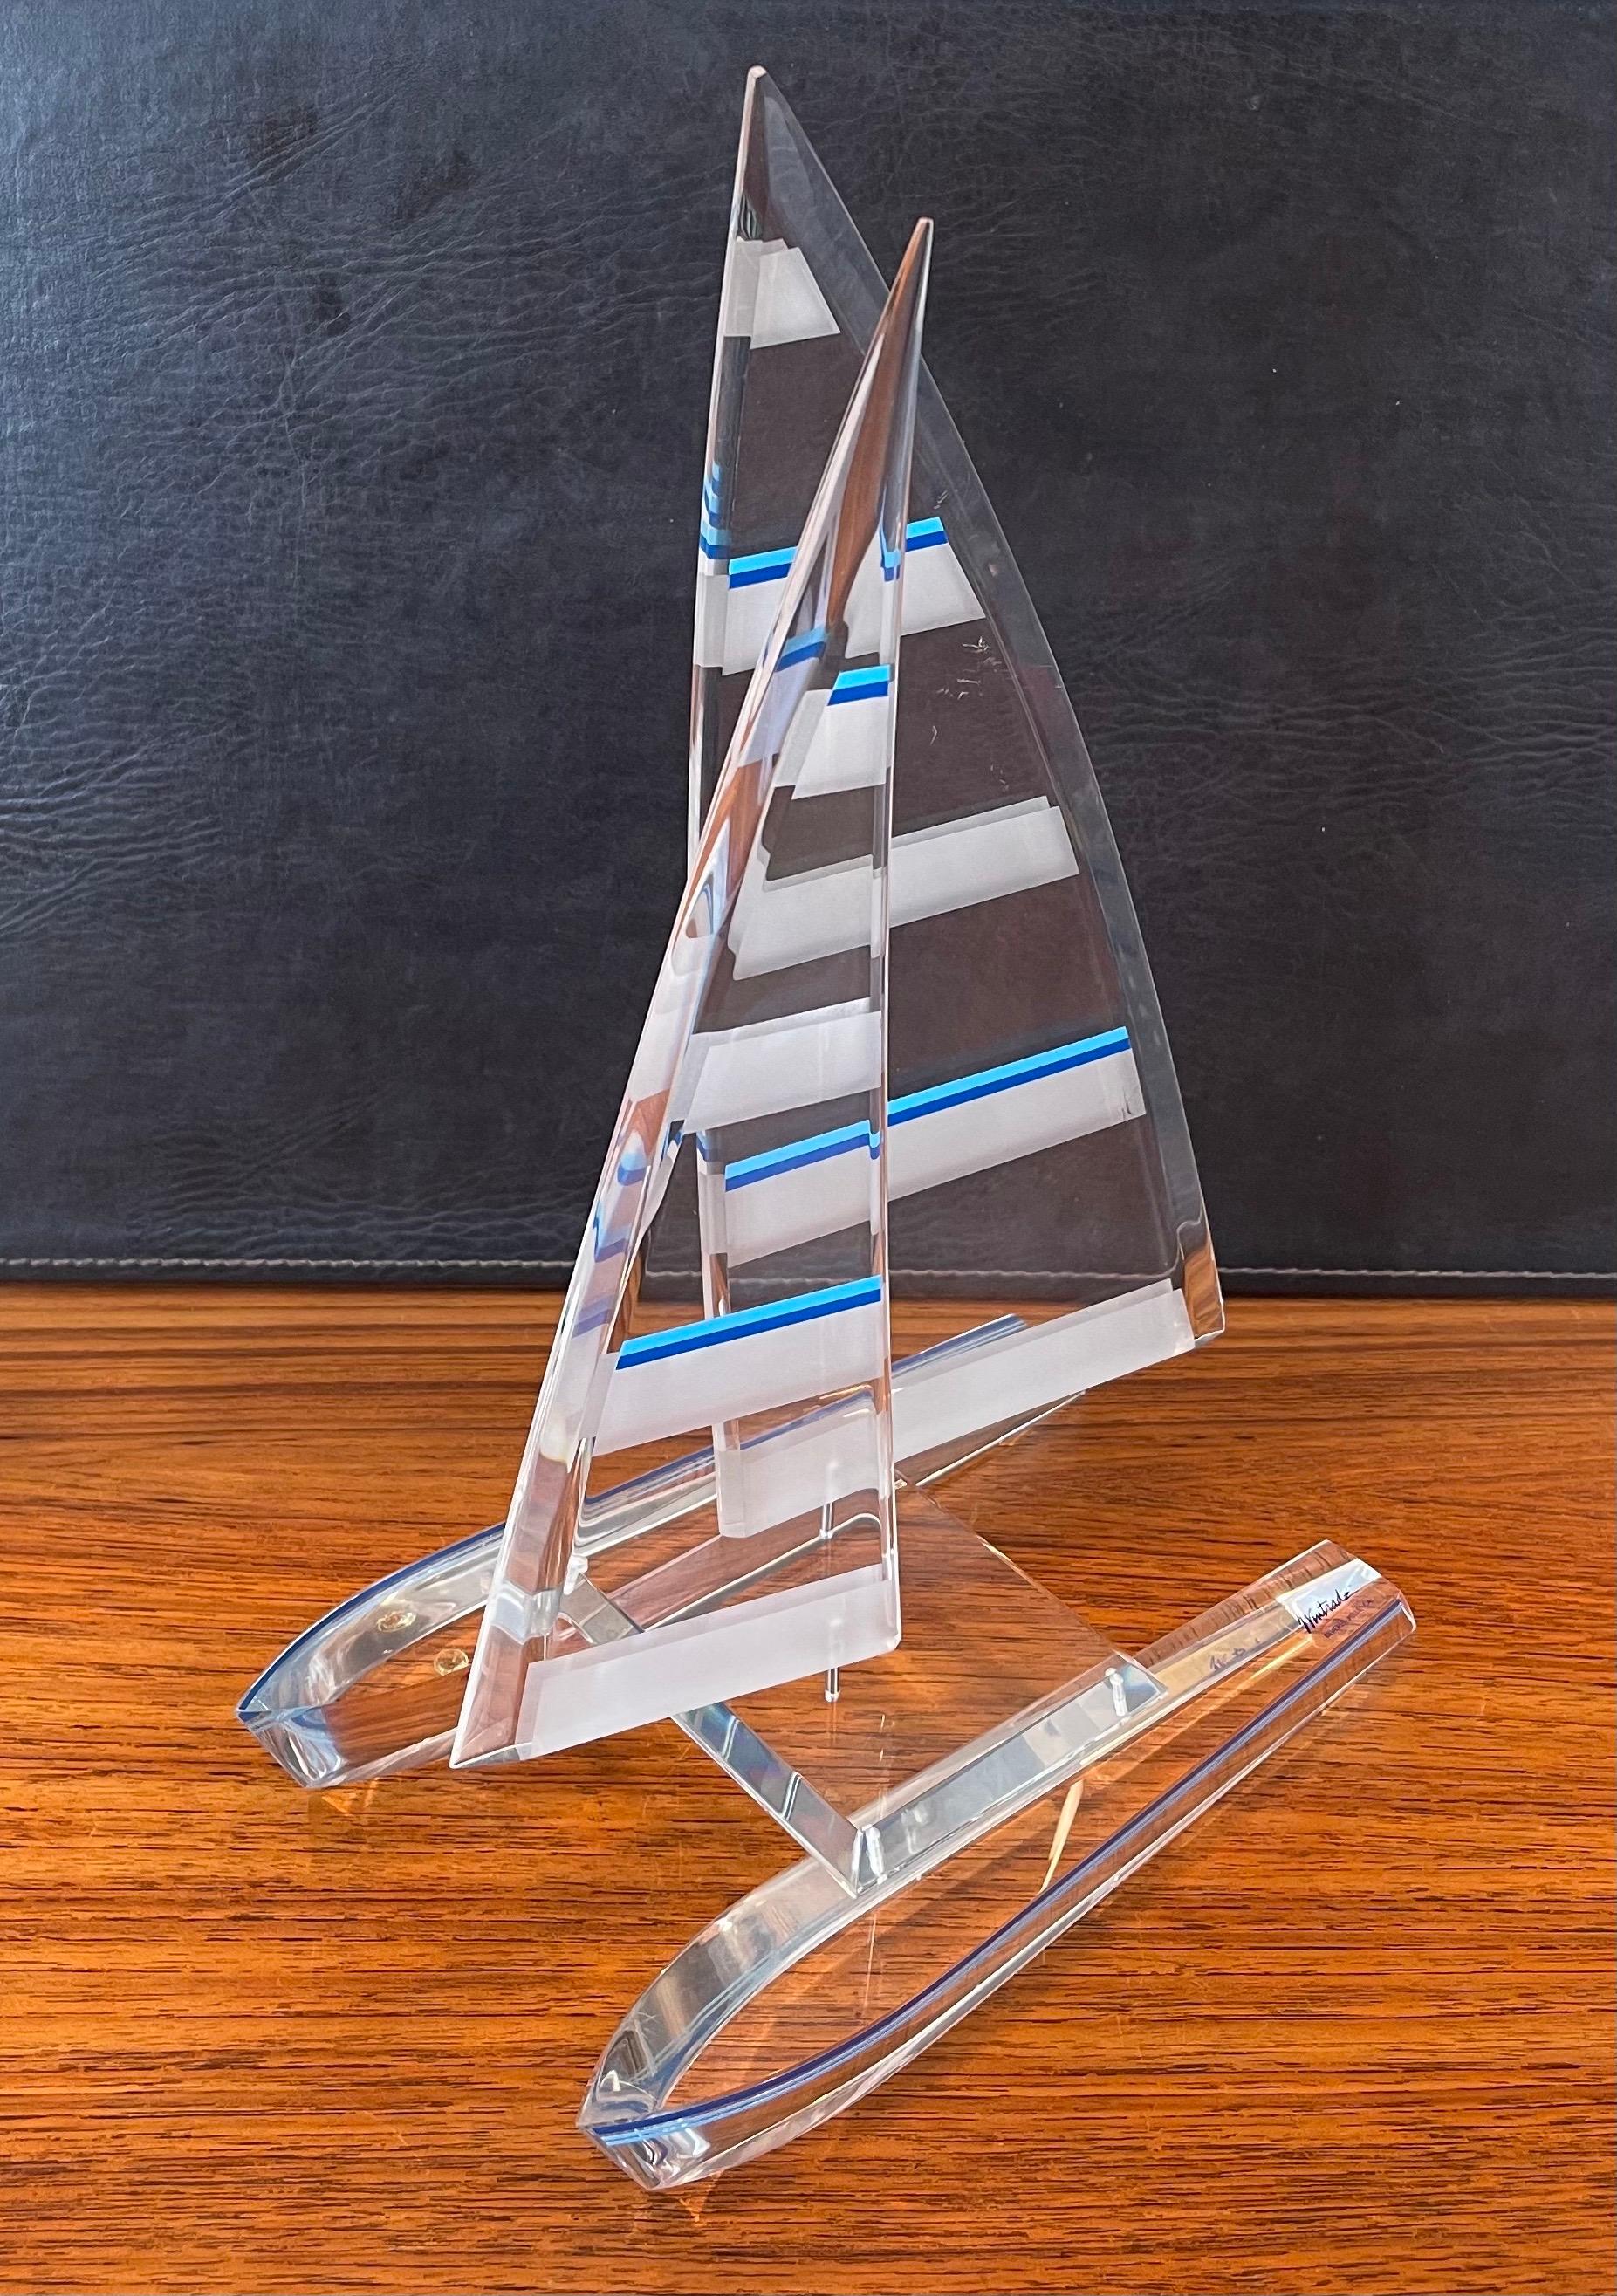 Beautiful lucite sailboat / catamaran sculpture by Wintrade of Beverly Hills, circa 2000s. This boat has two fixed hulls and two movable sails with white and blue horizontal striping. The piece is in excellent condition with no chips, cracks or